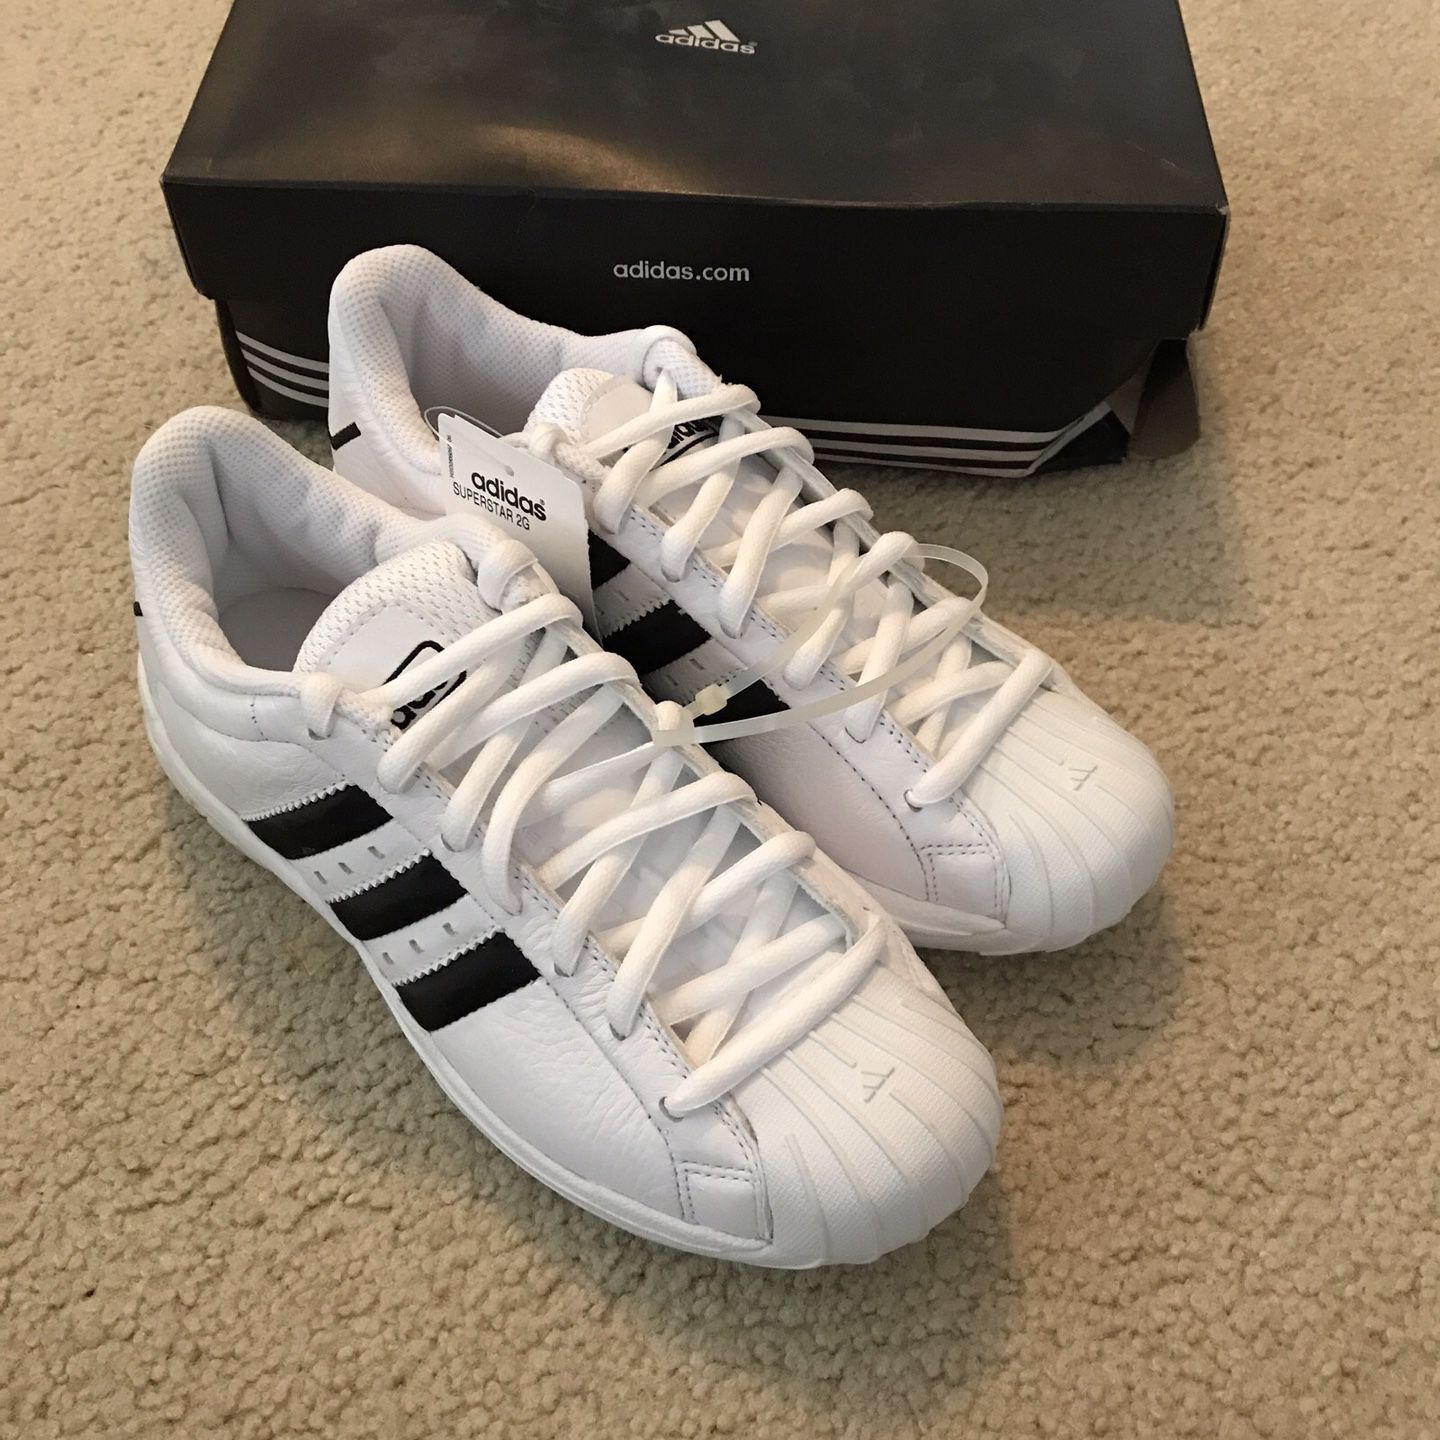 Adidas G2 white & black - mens 7.5, NEW in box. for Sale in Vernon, WI - OfferUp